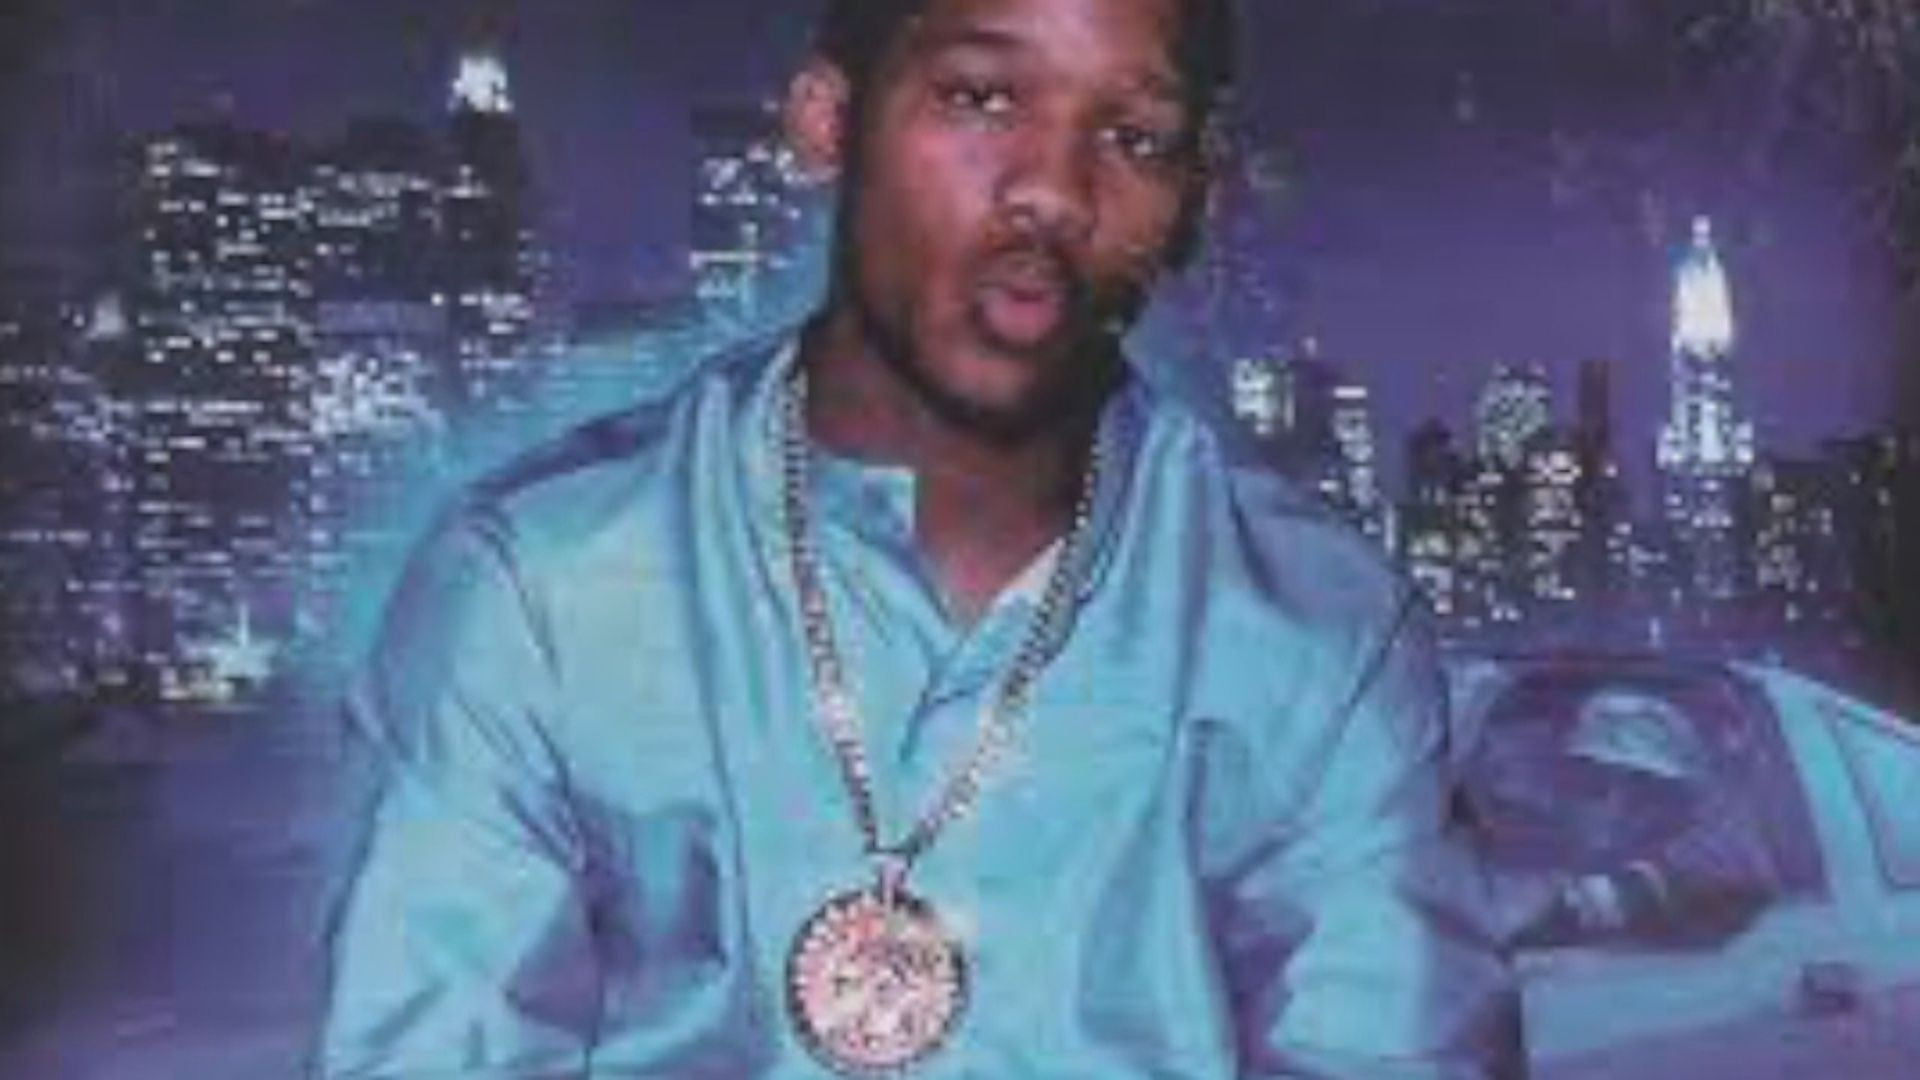 ⁣BREAKING!!! Alpo Martinez Reportedly Shot and Killed in Drive-By Shooting in Harlem